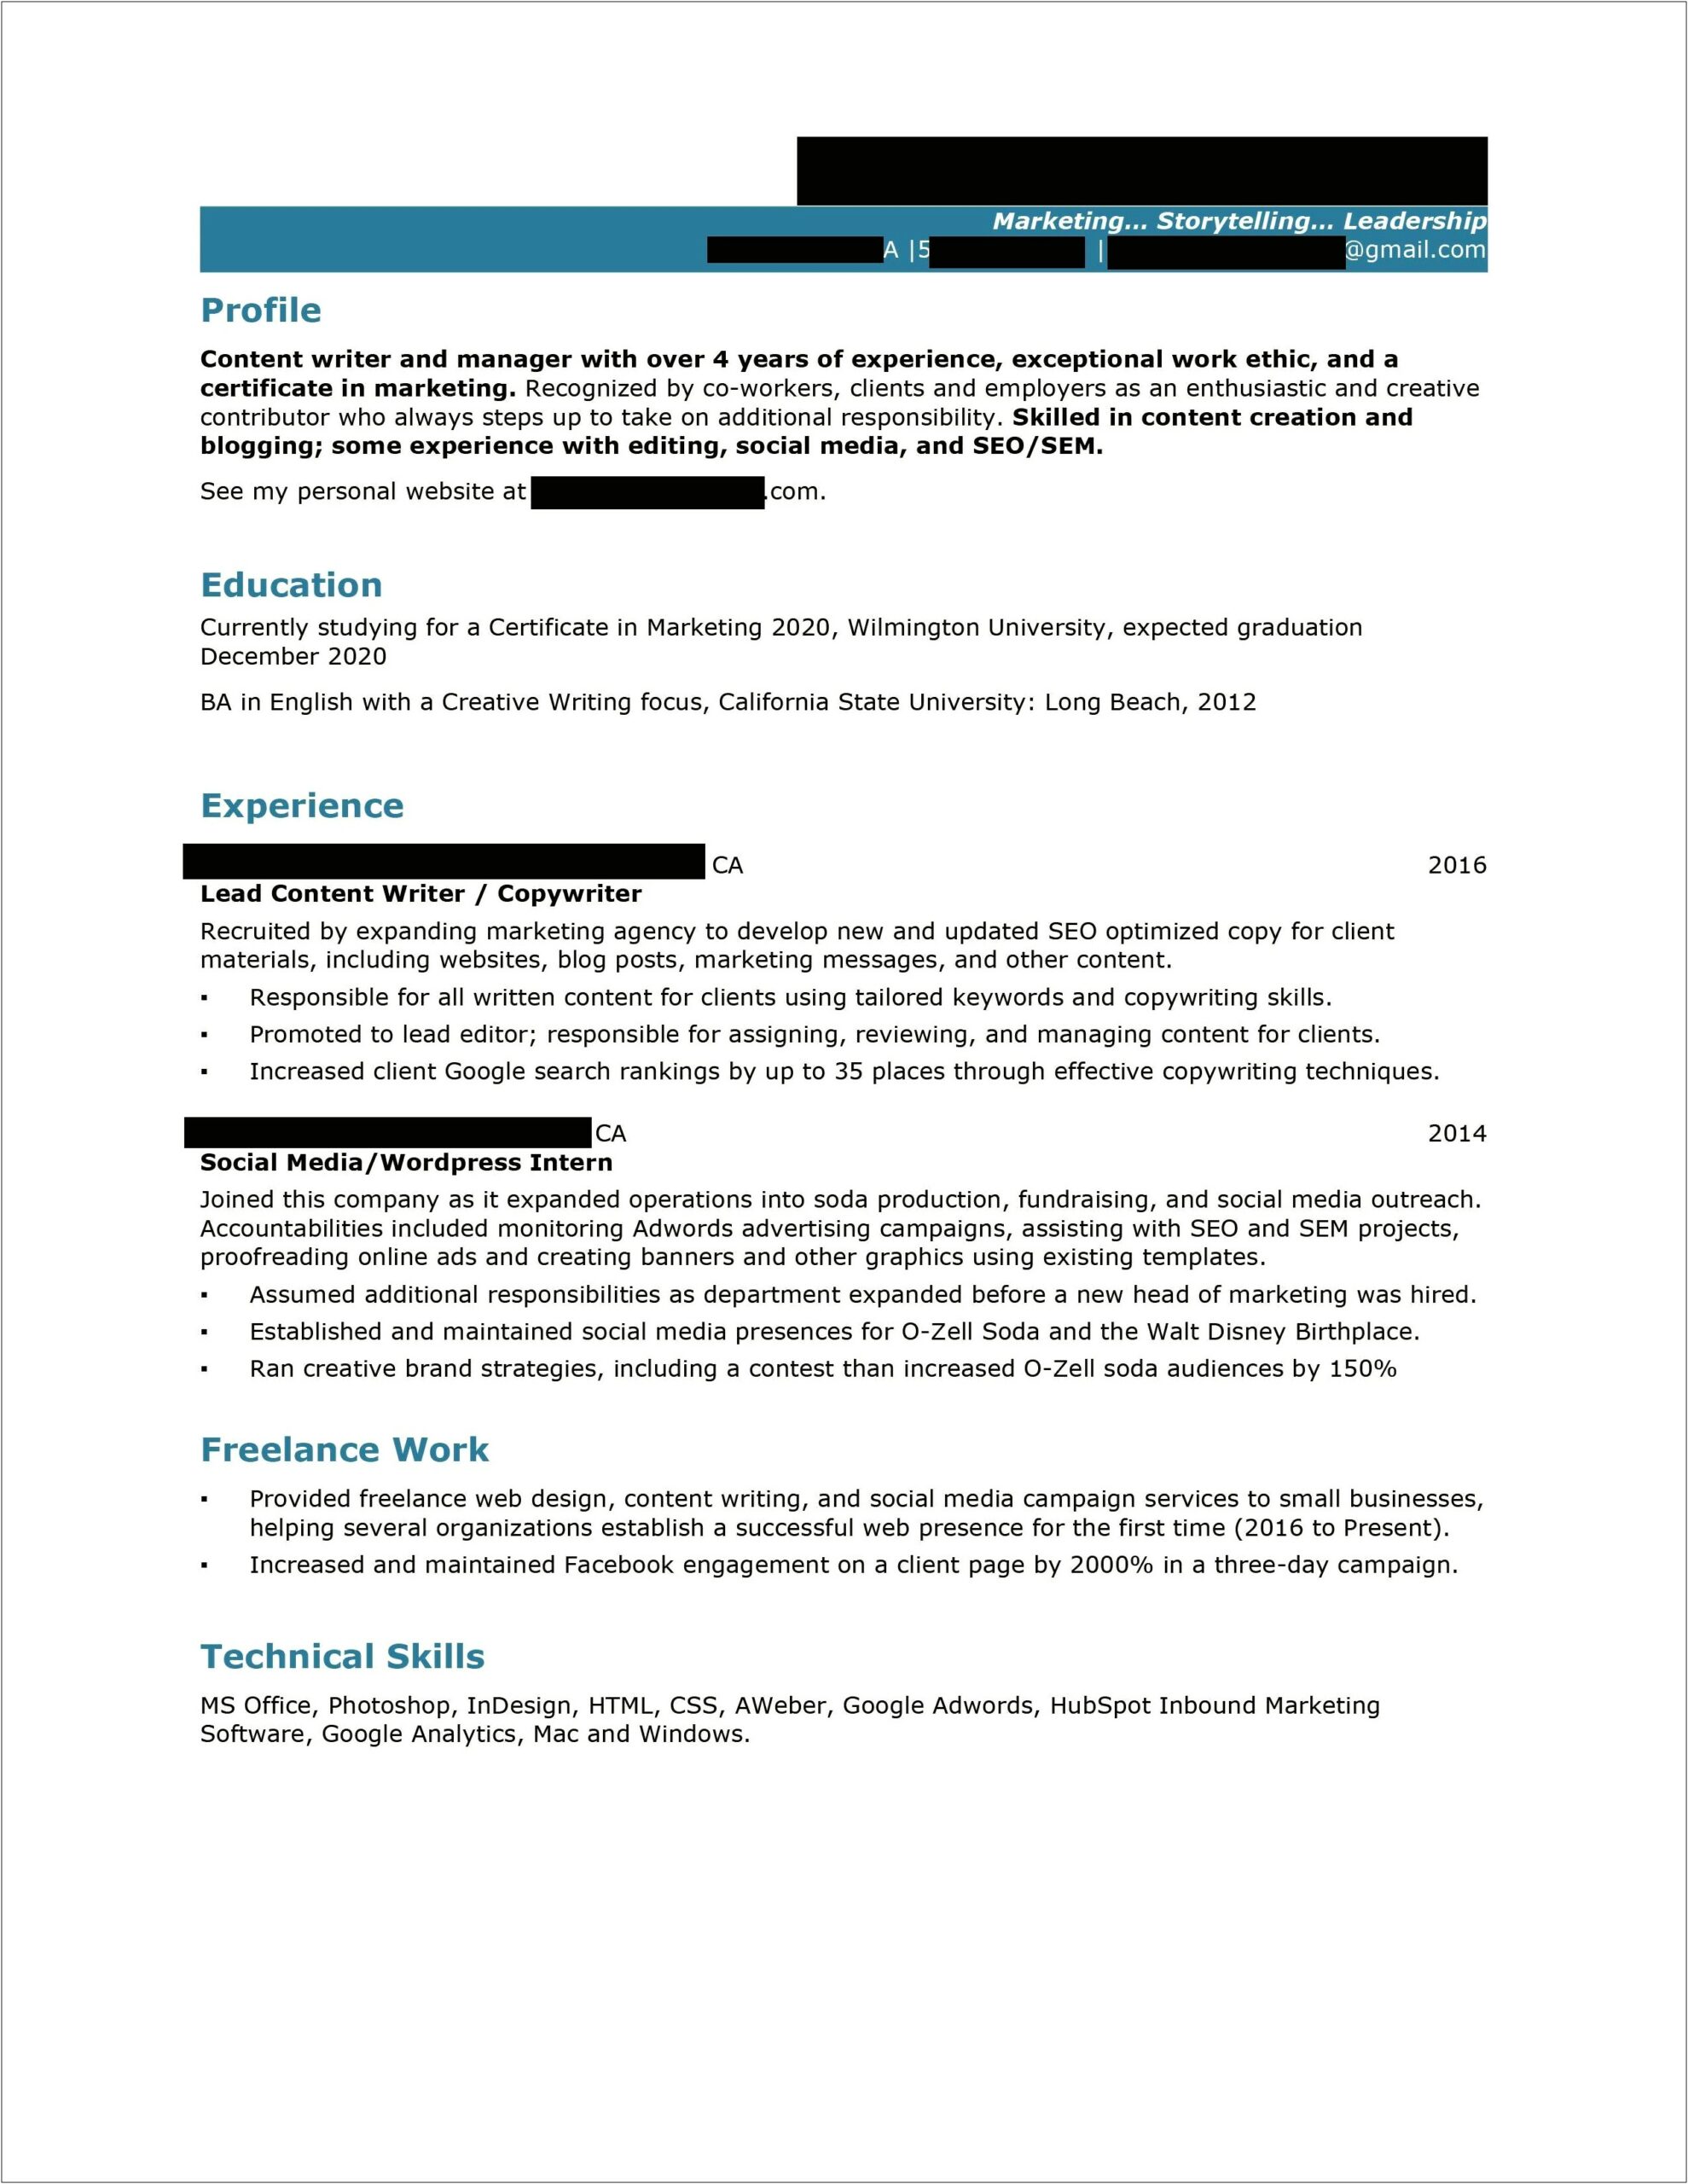 Best Way To Show Blog Posts In Resume